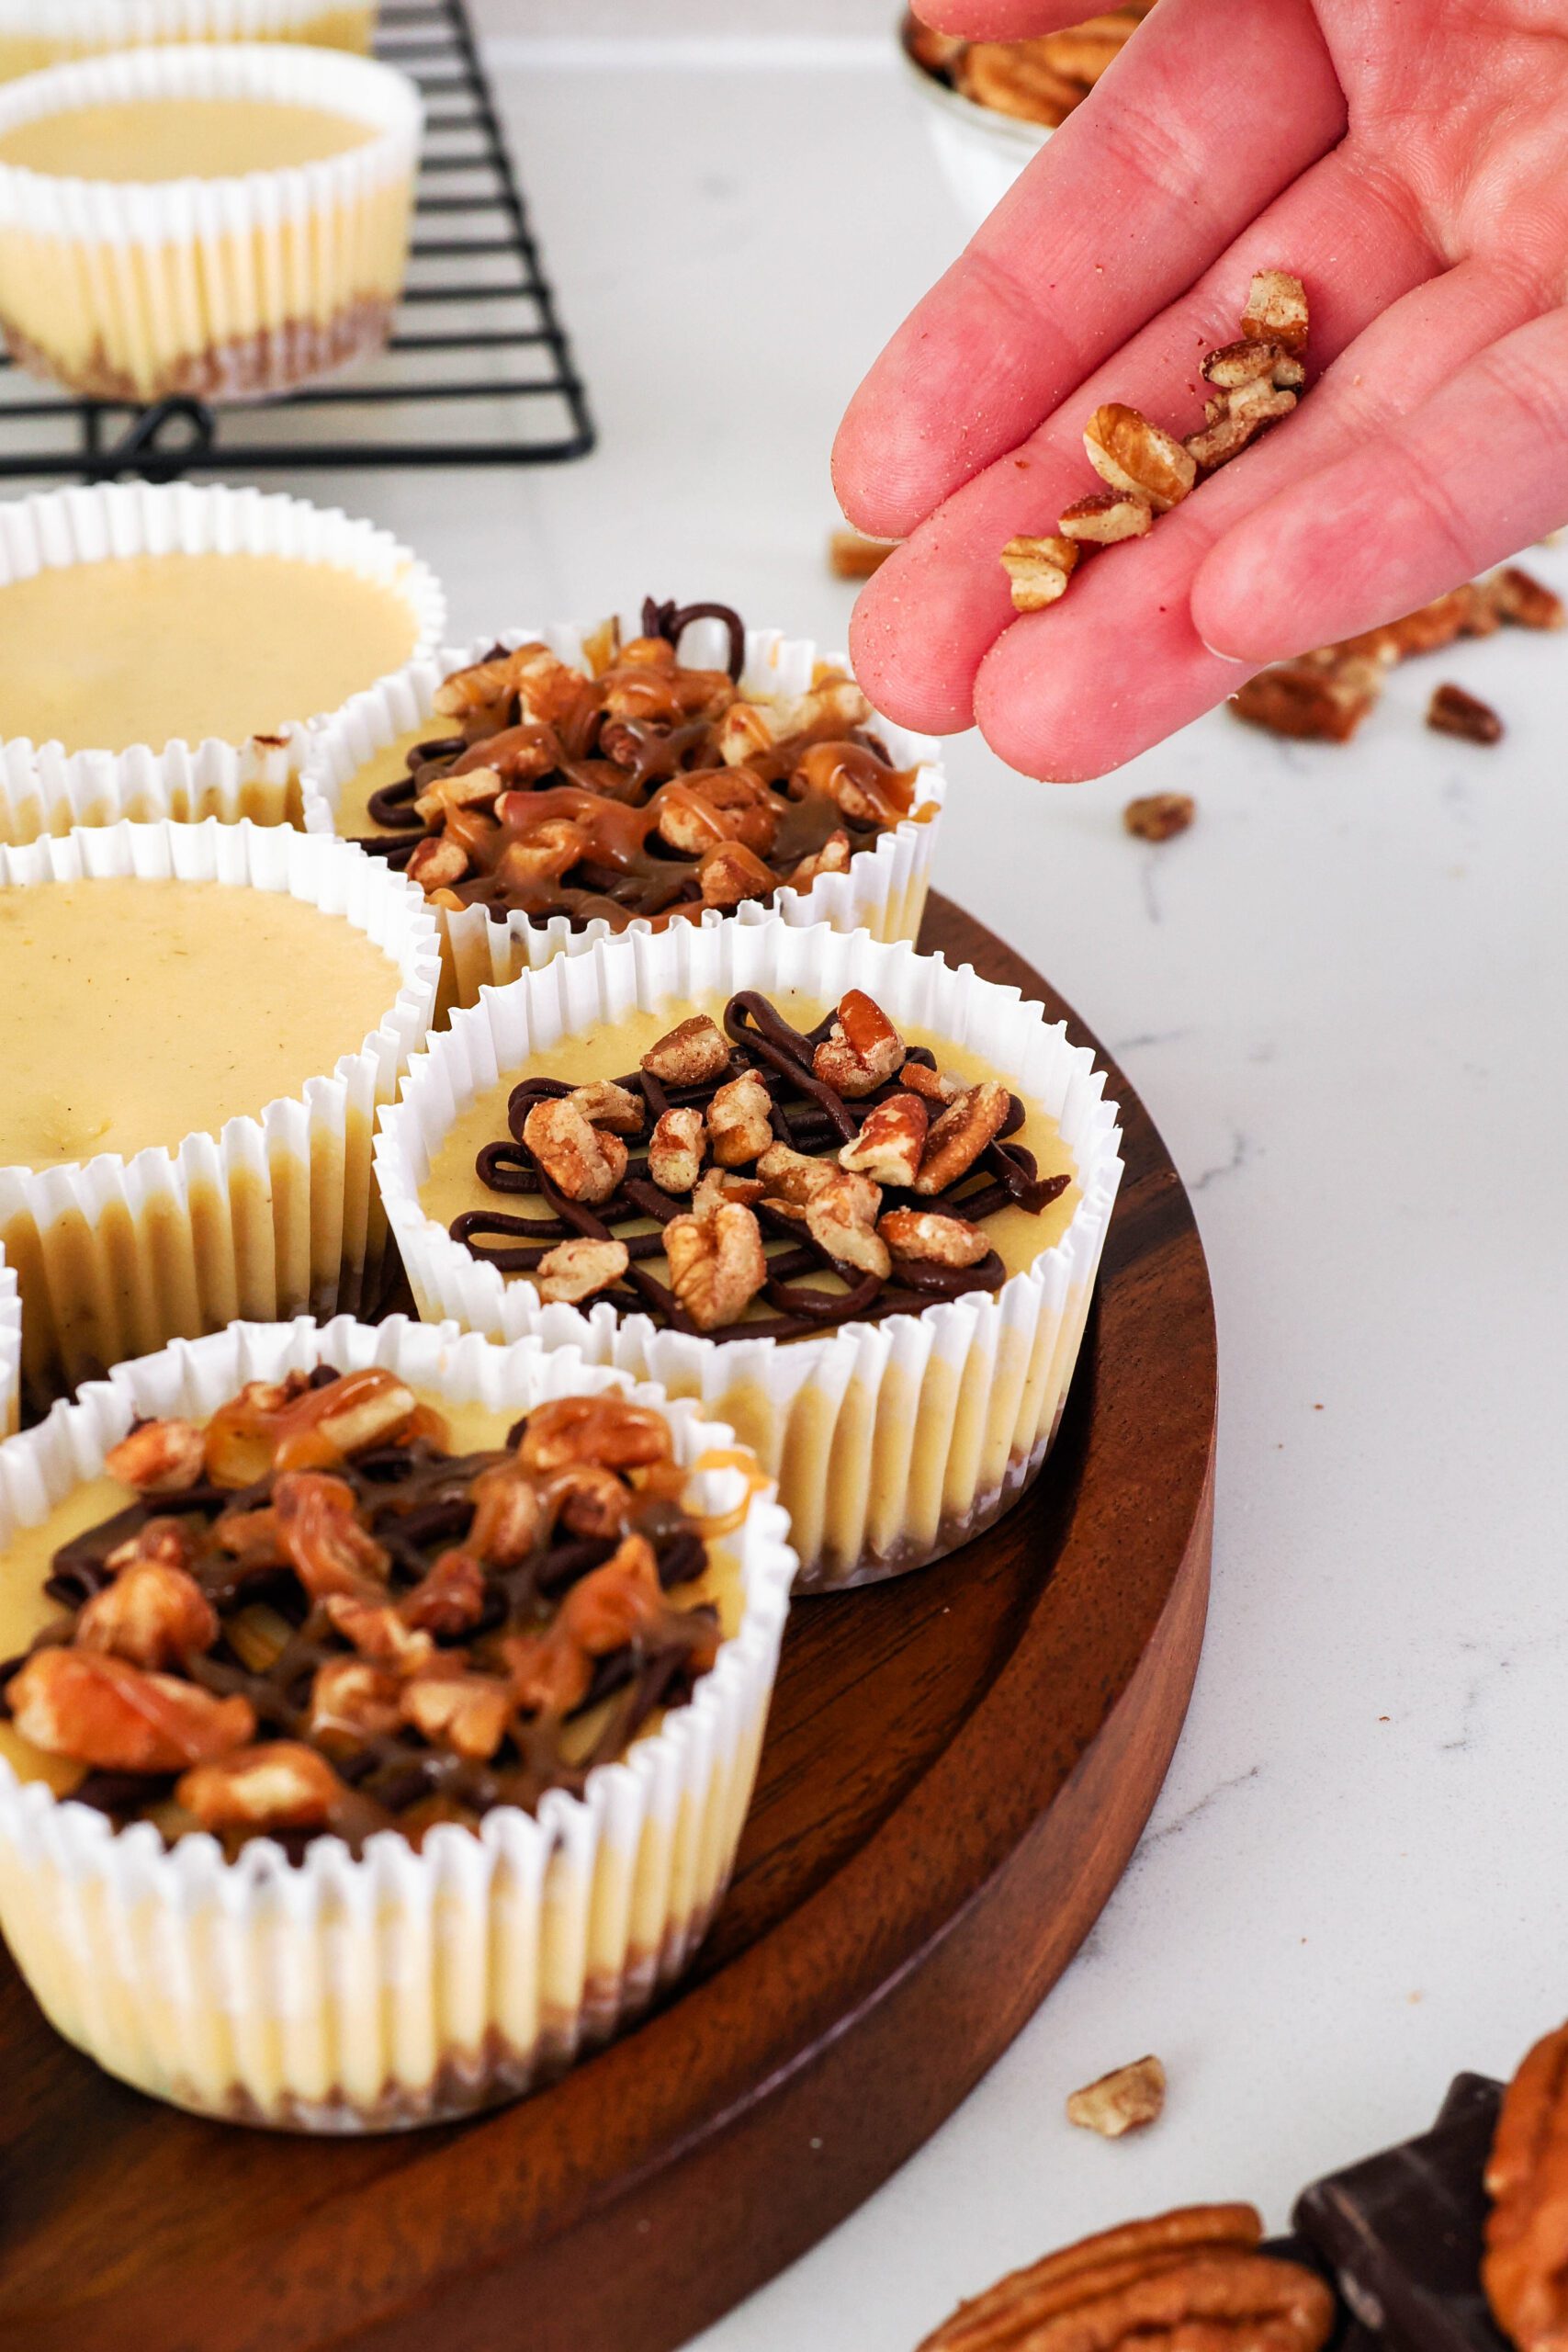 A hand adds pecan pieces to the top of a mini turtle cheesecake.